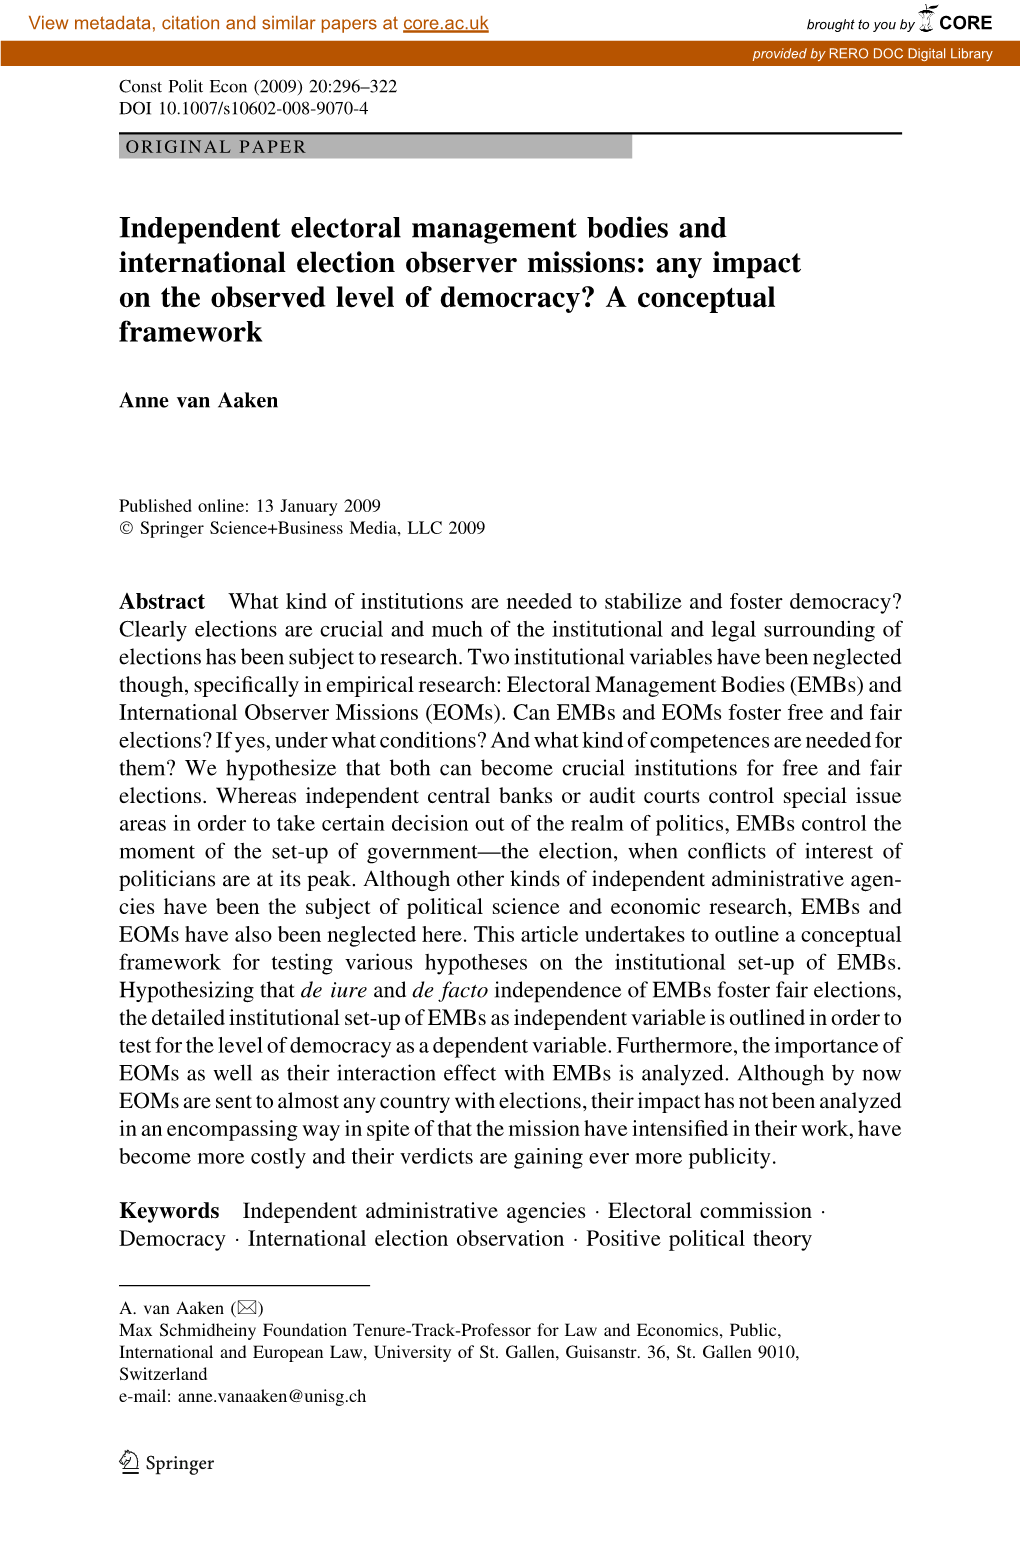 Independent Electoral Management Bodies and International Election Observer Missions: Any Impact on the Observed Level of Democracy? a Conceptual Framework